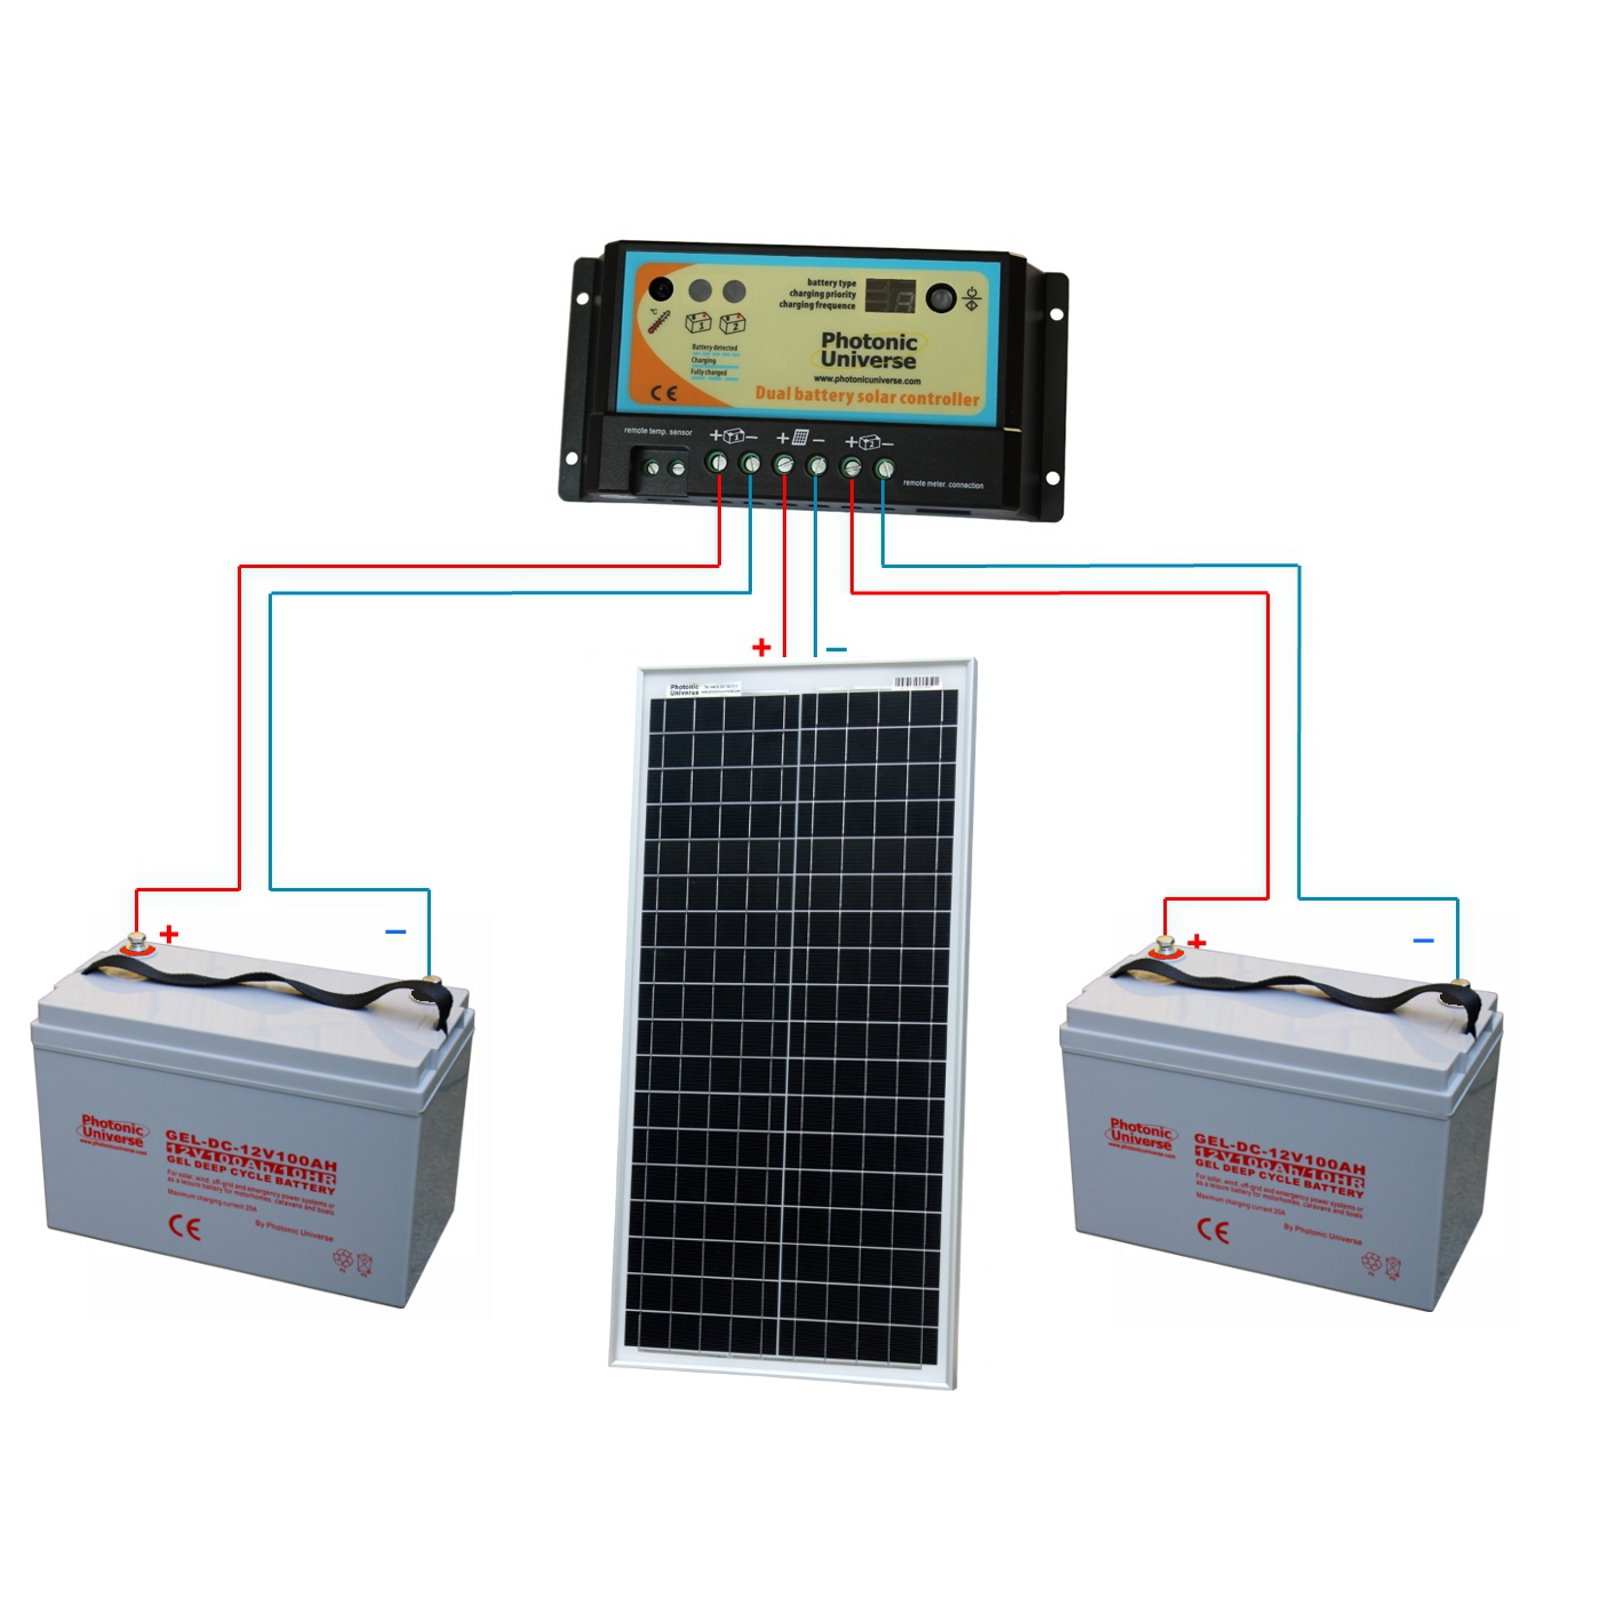 Connection diagram for 40W 12V  Photonic Universe dual battery solar charging kit